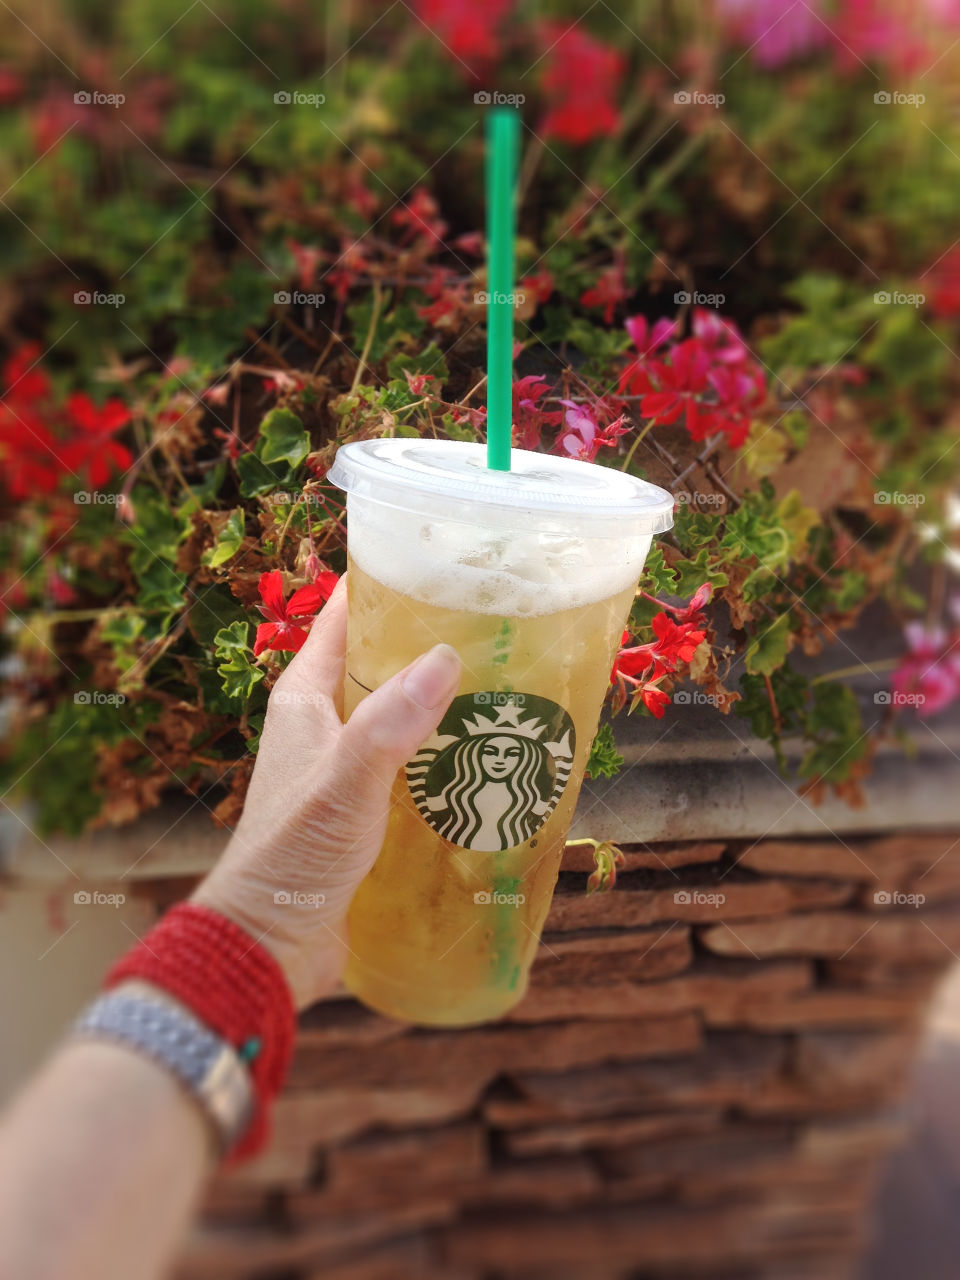 A Starbucks refreshing green ice tea with lots of ice cubes perfect drink for the summertime